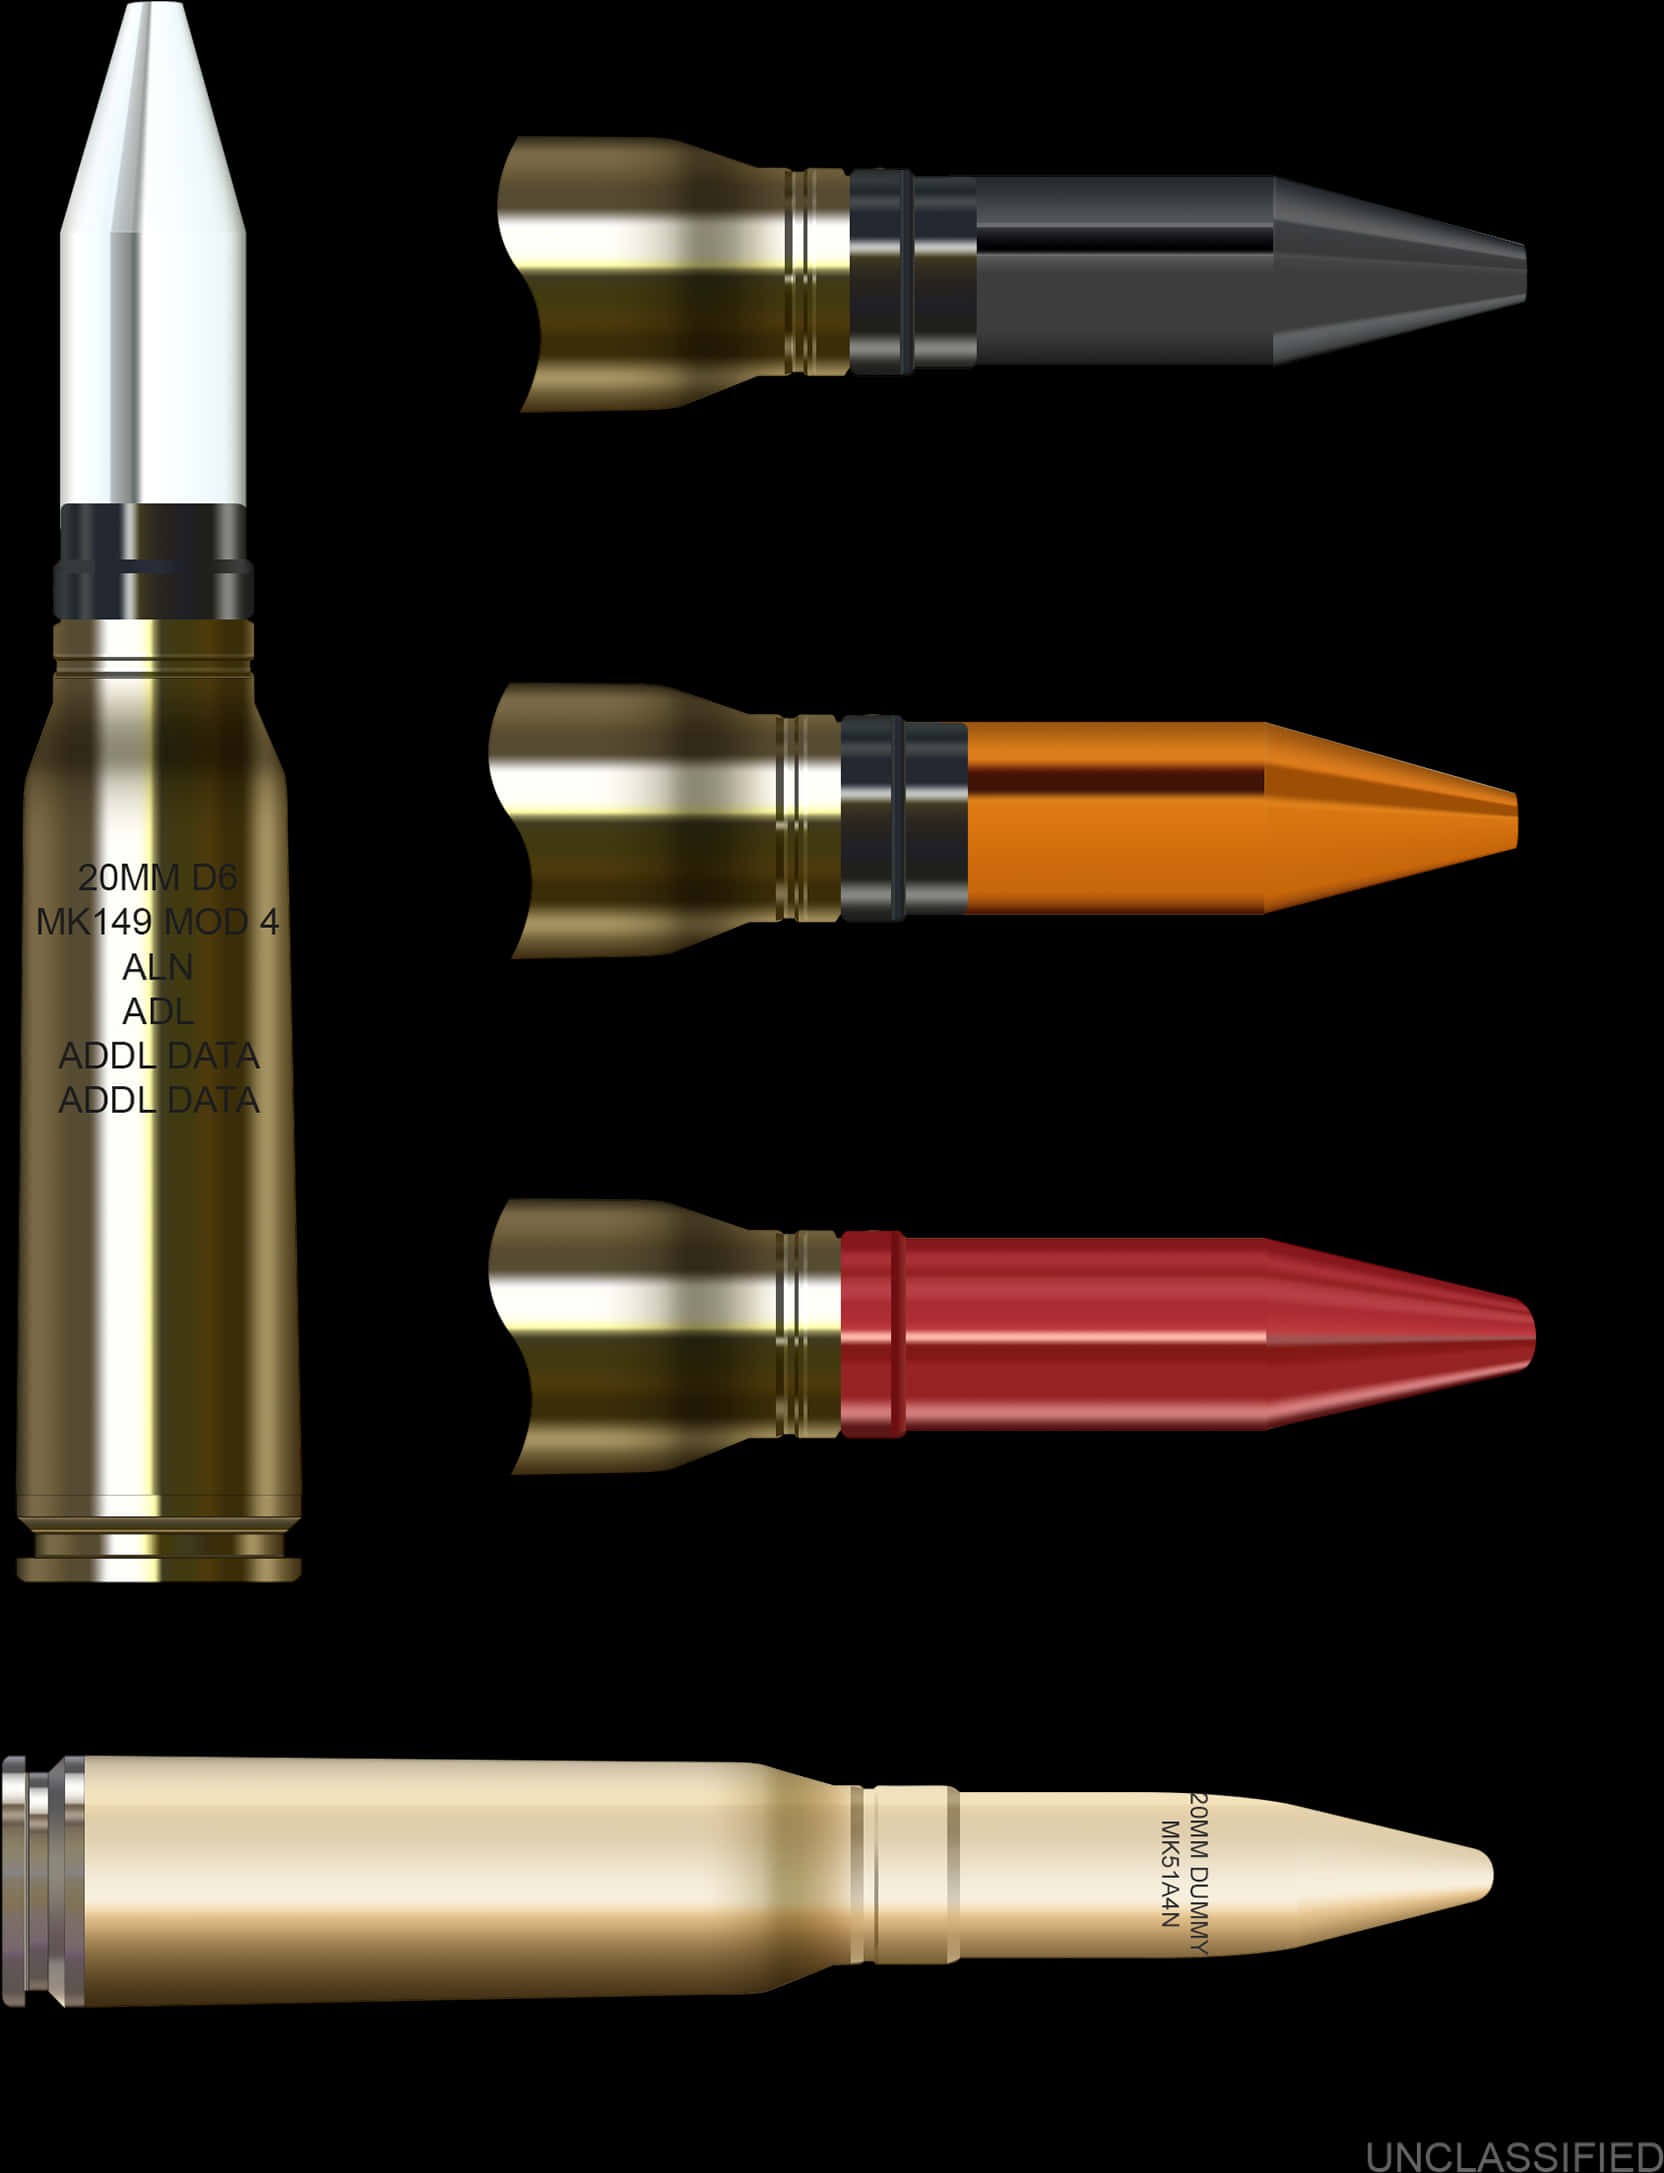 A Group Of Bullets With Different Colors